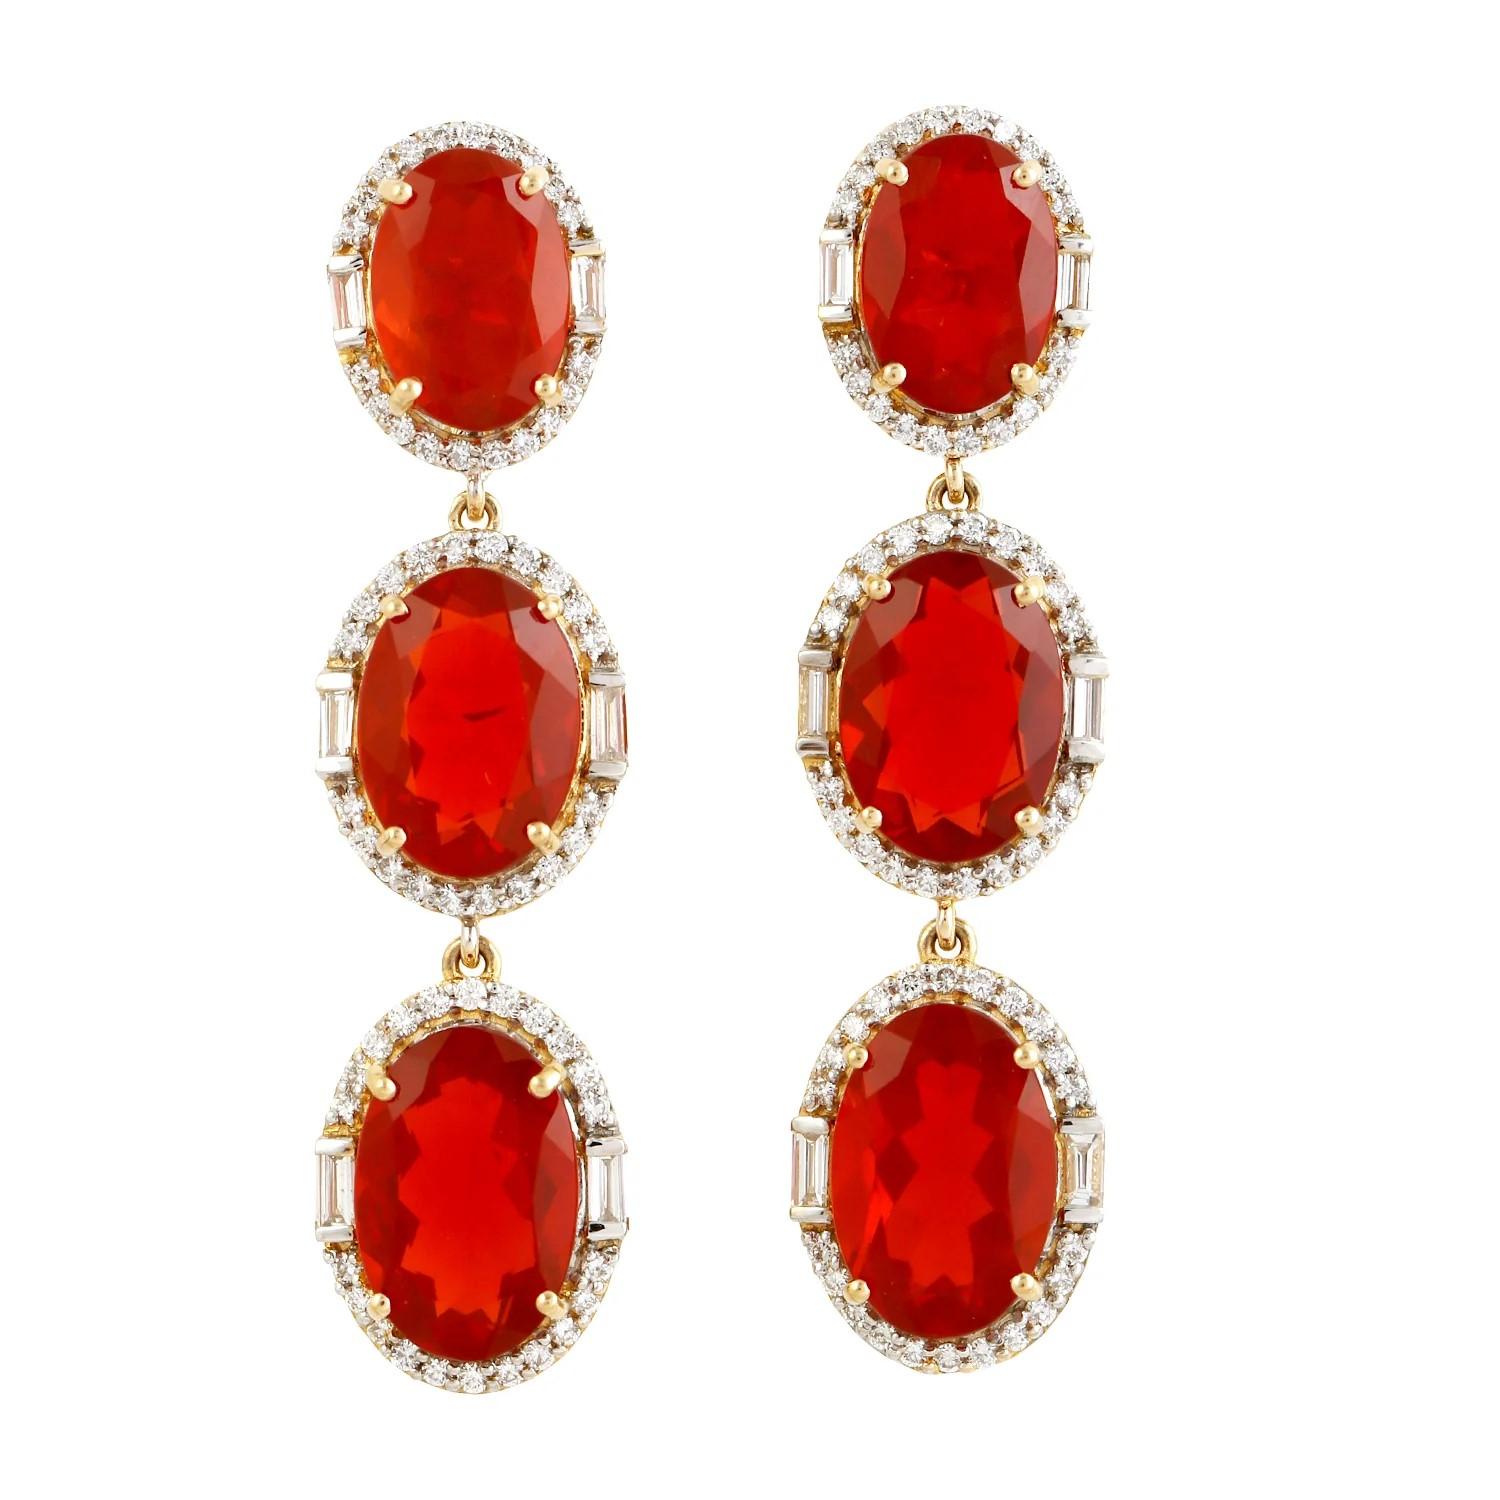 Cast in 18 karat gold, these exquisite earrings are hand set with 13.27 carats fire opal and 1.09 carats of glimmering diamonds. 

FOLLOW MEGHNA JEWELS storefront to view the latest collection & exclusive pieces. Meghna Jewels is proudly rated as a